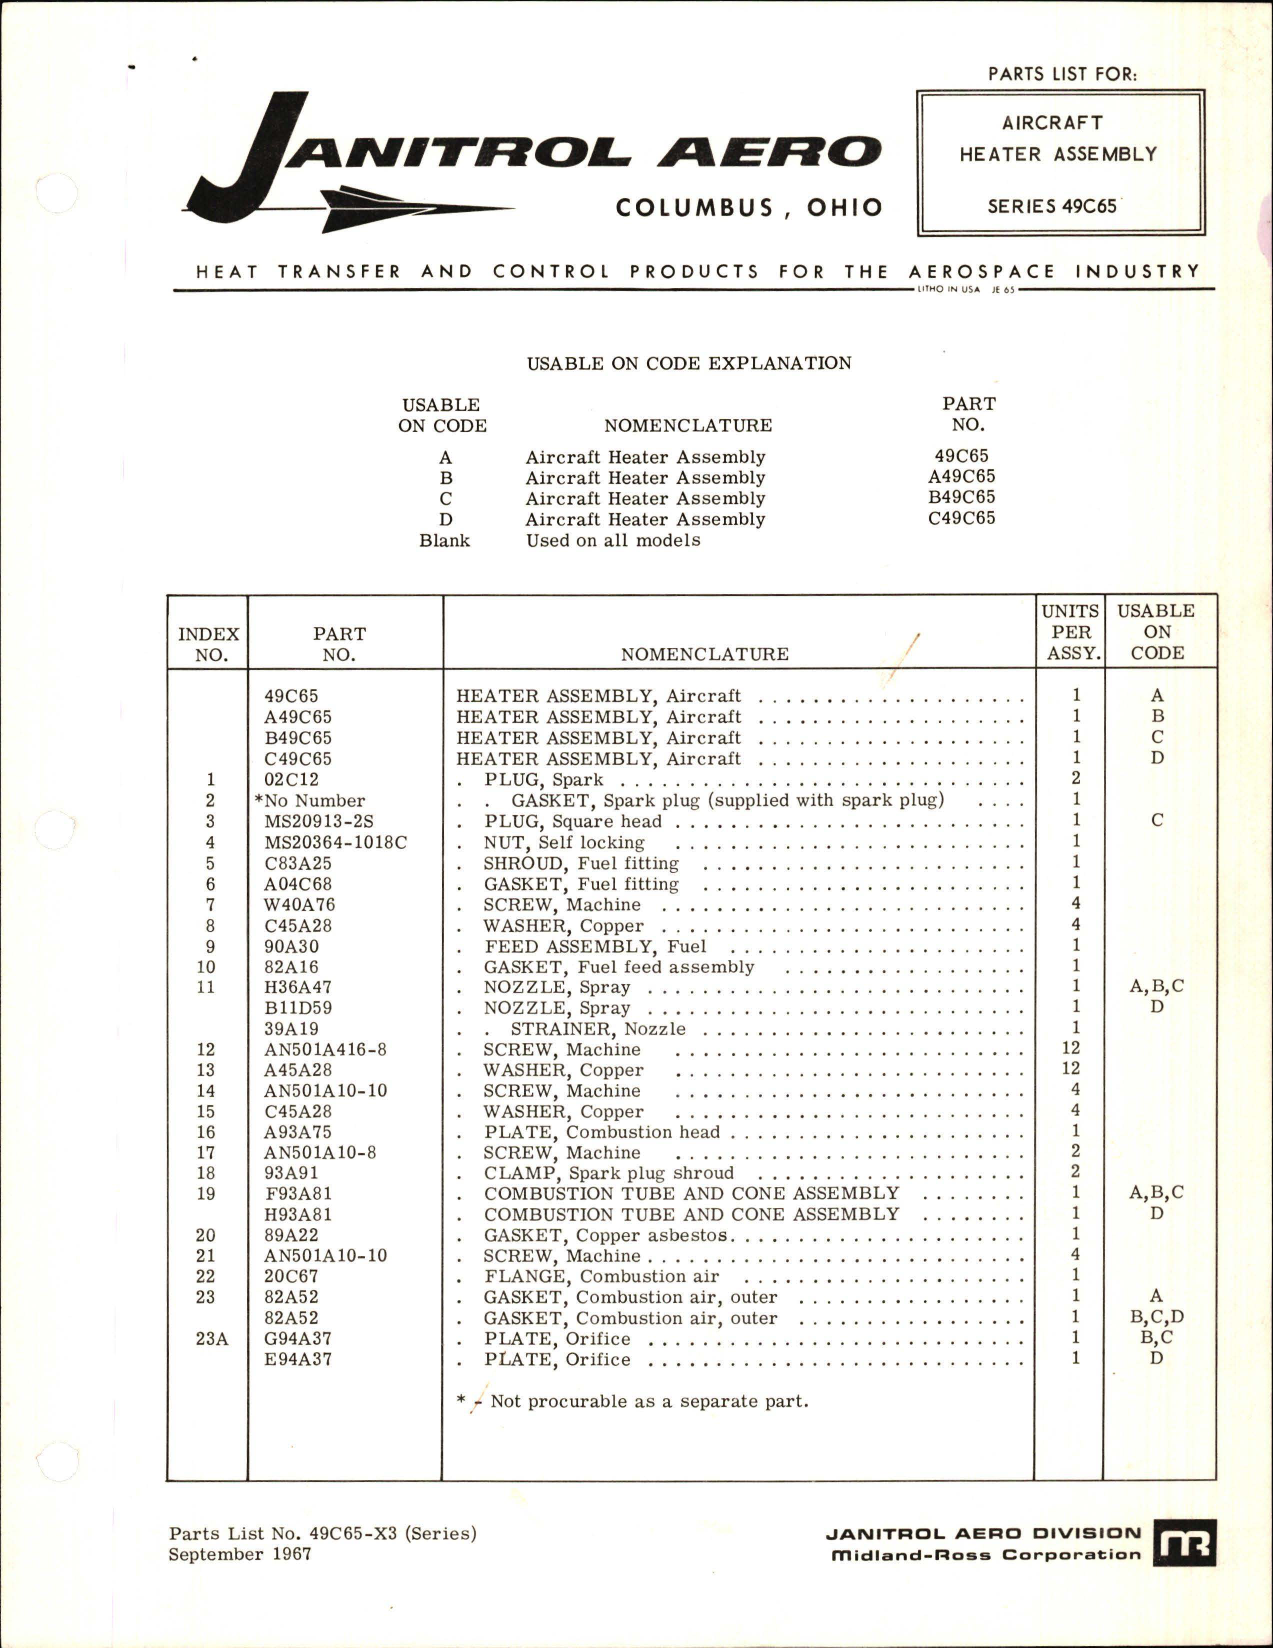 Sample page 1 from AirCorps Library document: Parts List for Aircraft Heater Assembly - Series 49C65